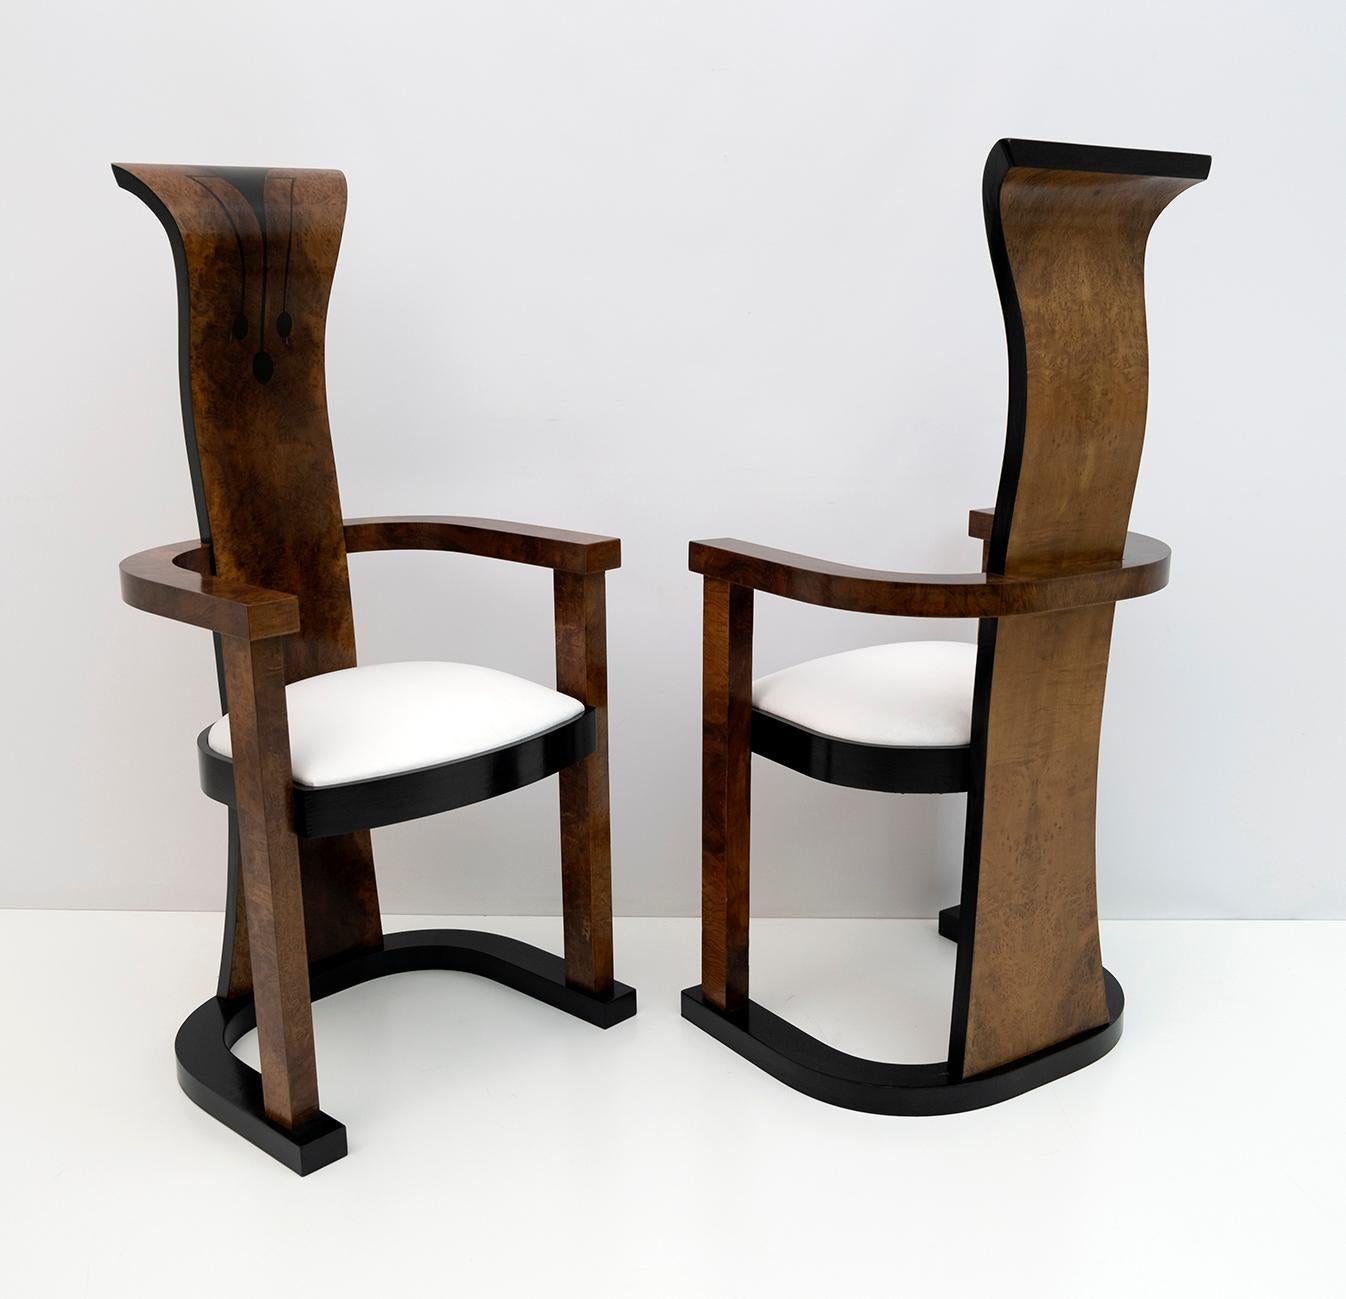 Pair of high chairs from the Art Deco period, in Frank Lloyd Wright style. The chairs are in ebonized walnut and briar walnut with inlays on the back, they have been restored and polished with shellac, the upholstery is in white velvet.